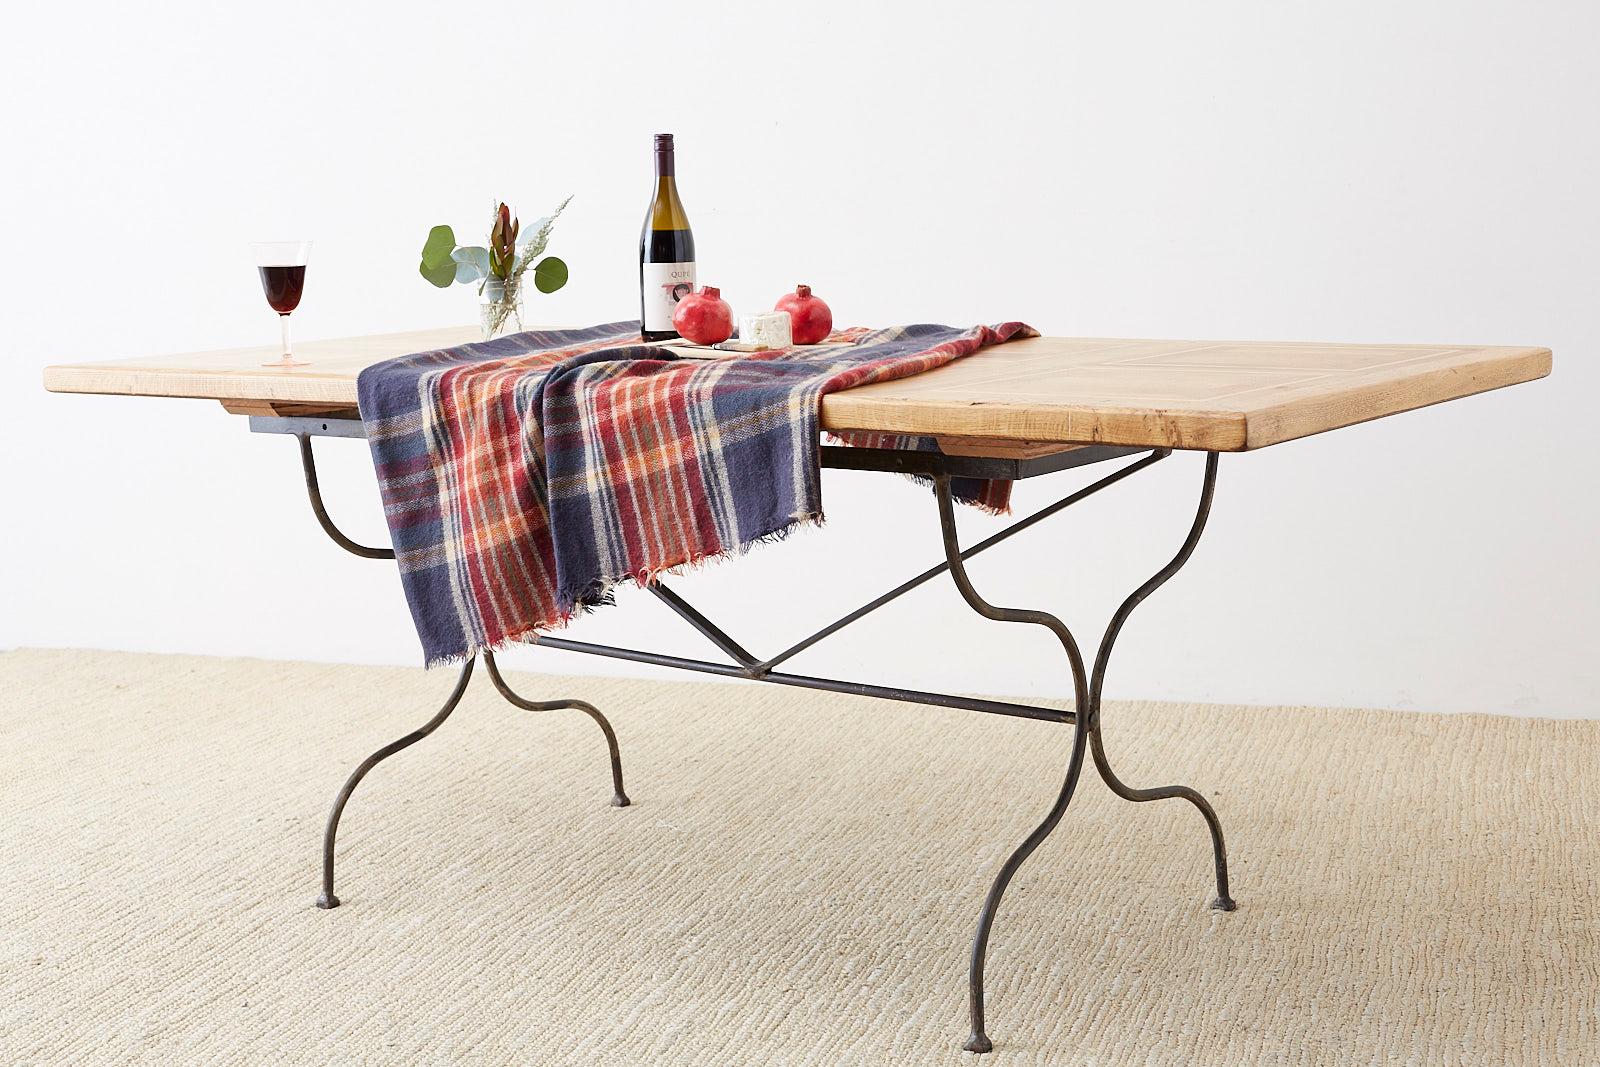 Rustic Italian farm table featuring an iron trestle style base. The thick oak top is constructed with geometrical inlay with square patterns on top. Excellent joinery and craftsmanship that showcases the rich oak grain patterns. The iron base has